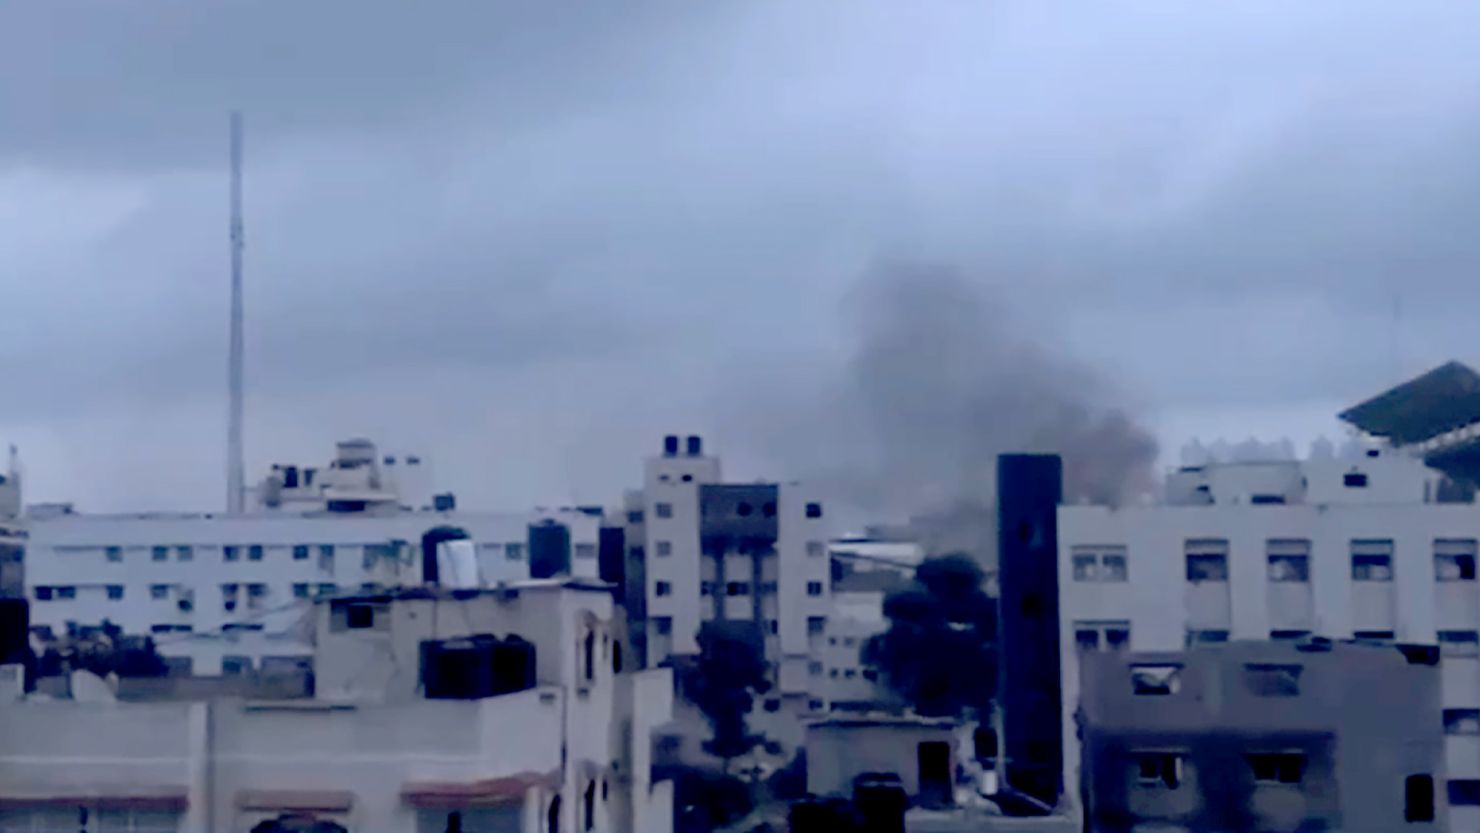 Smoke is seen billowing in the vicinity of the Al-Shifa hospital complex in Gaza.